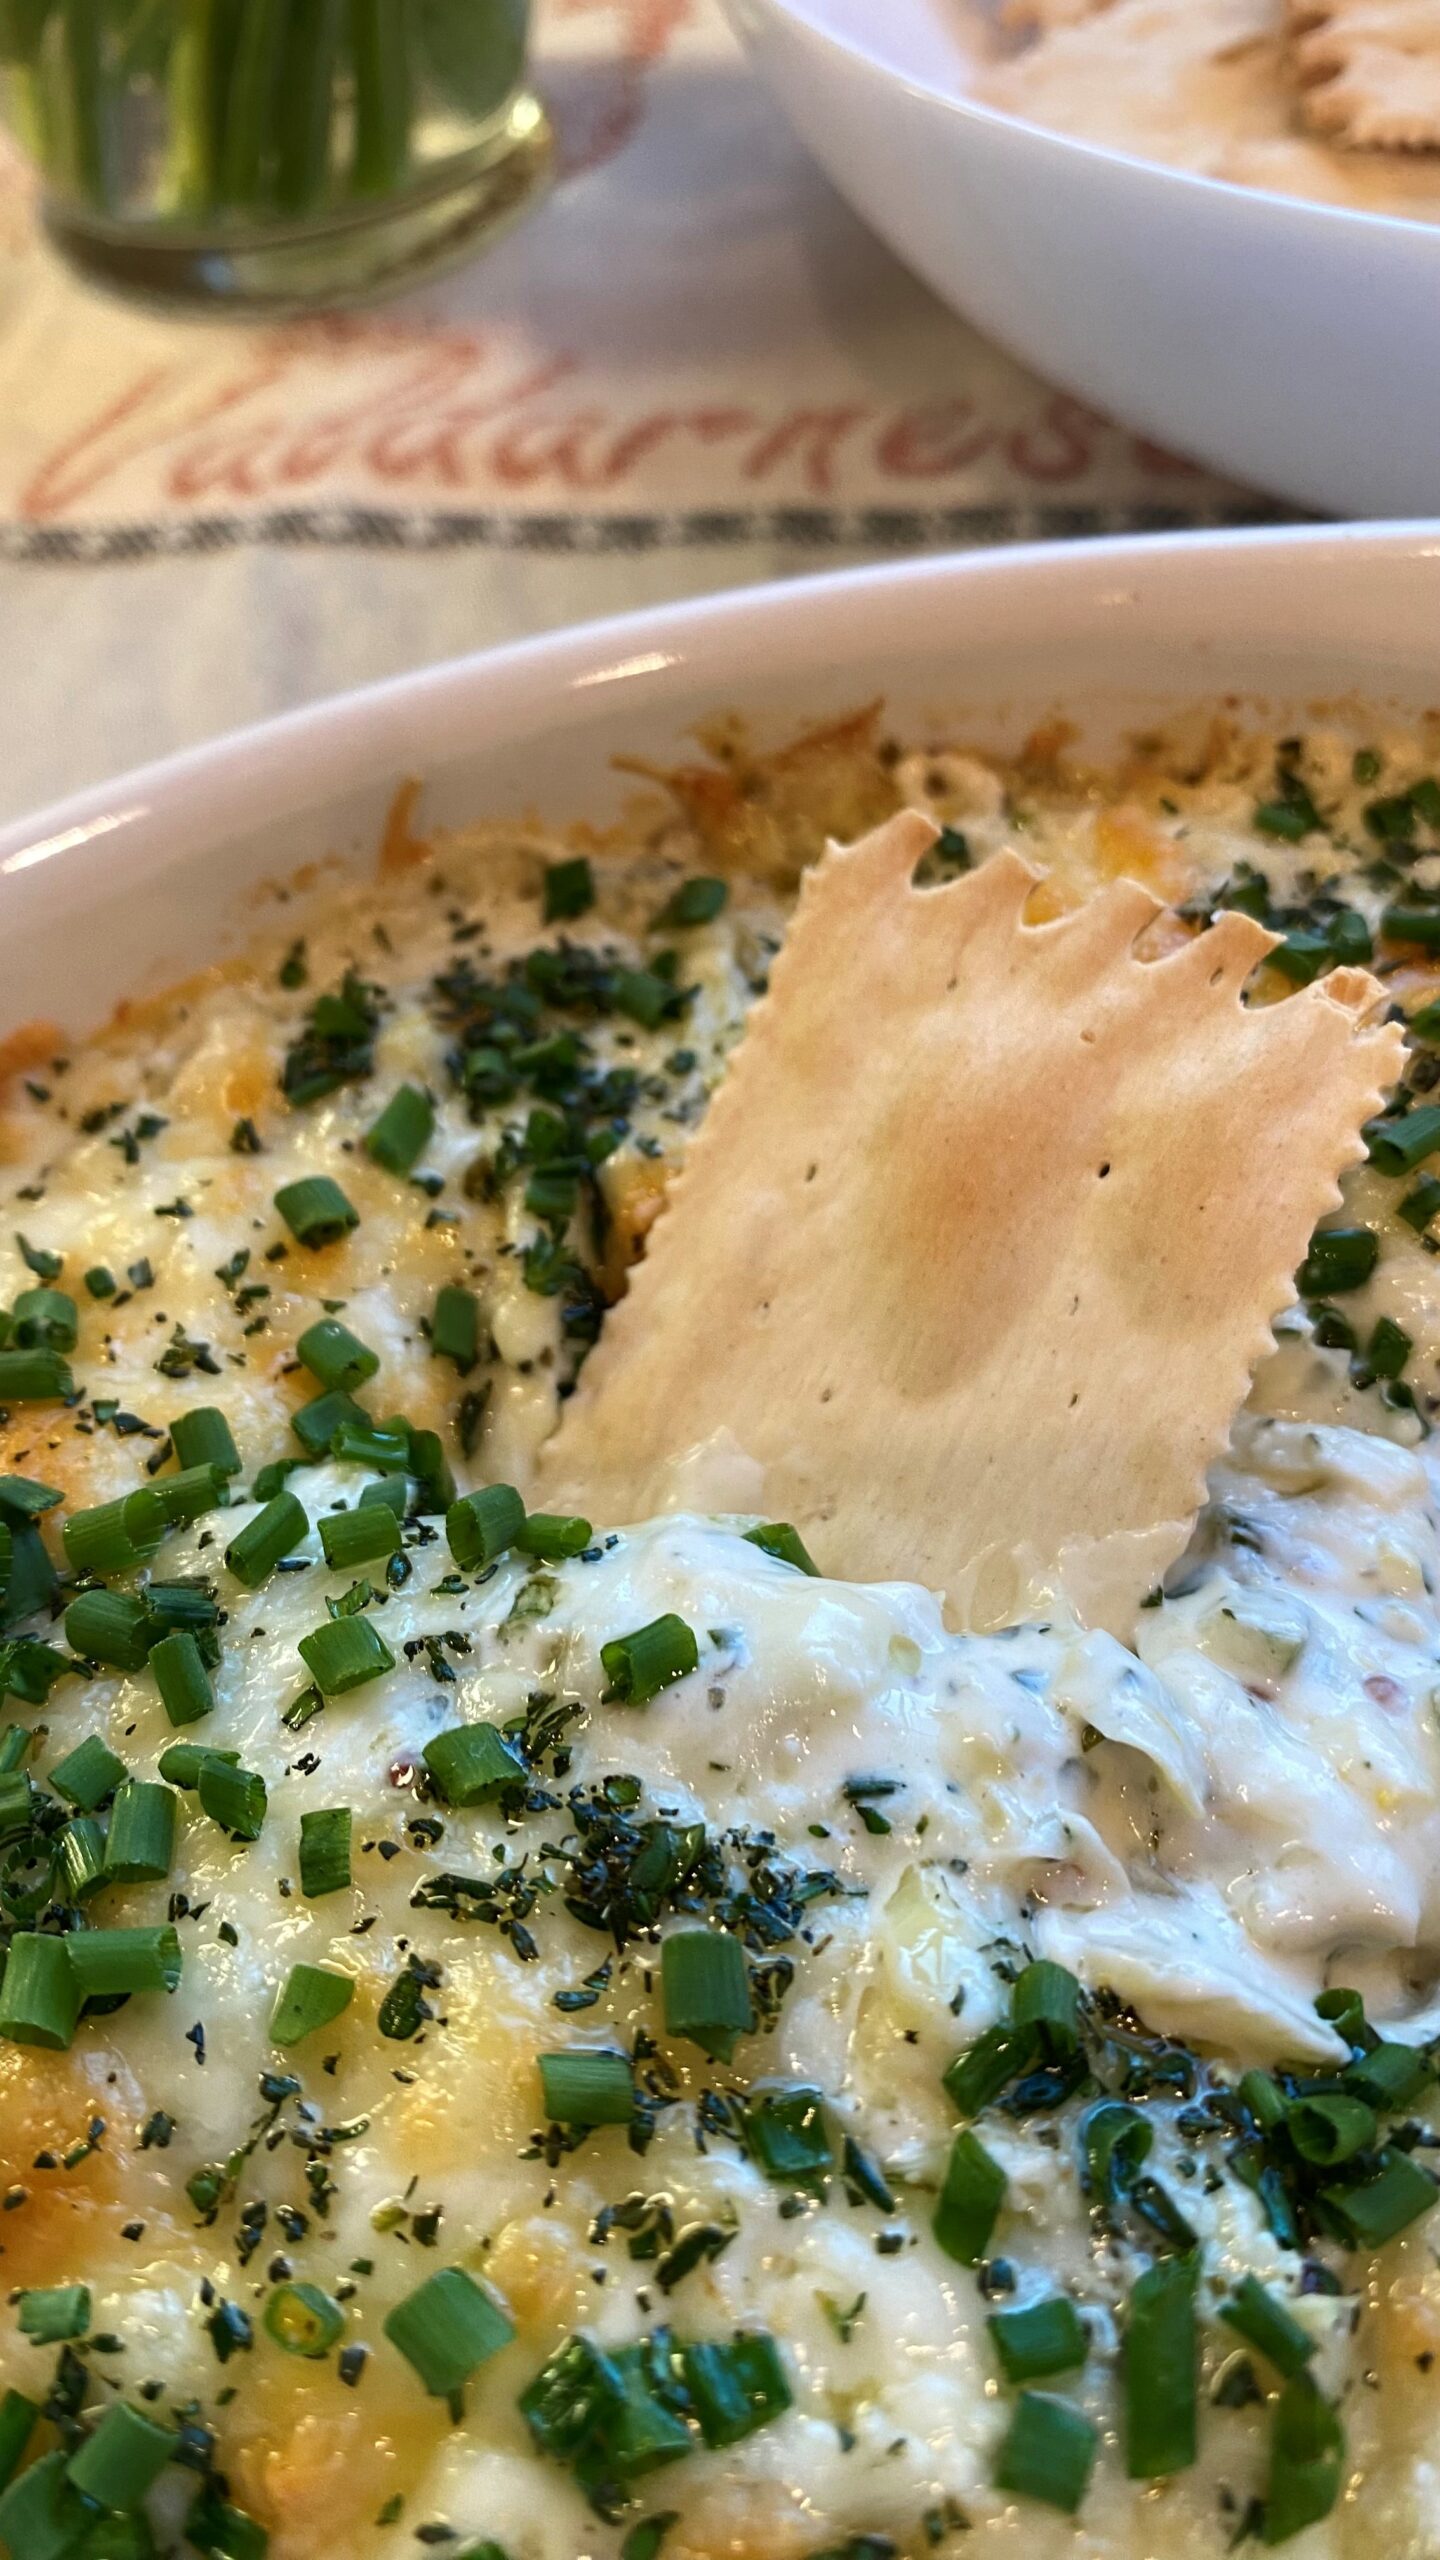 Warm Artichoke-Olive Dip with Lemon and Herbs